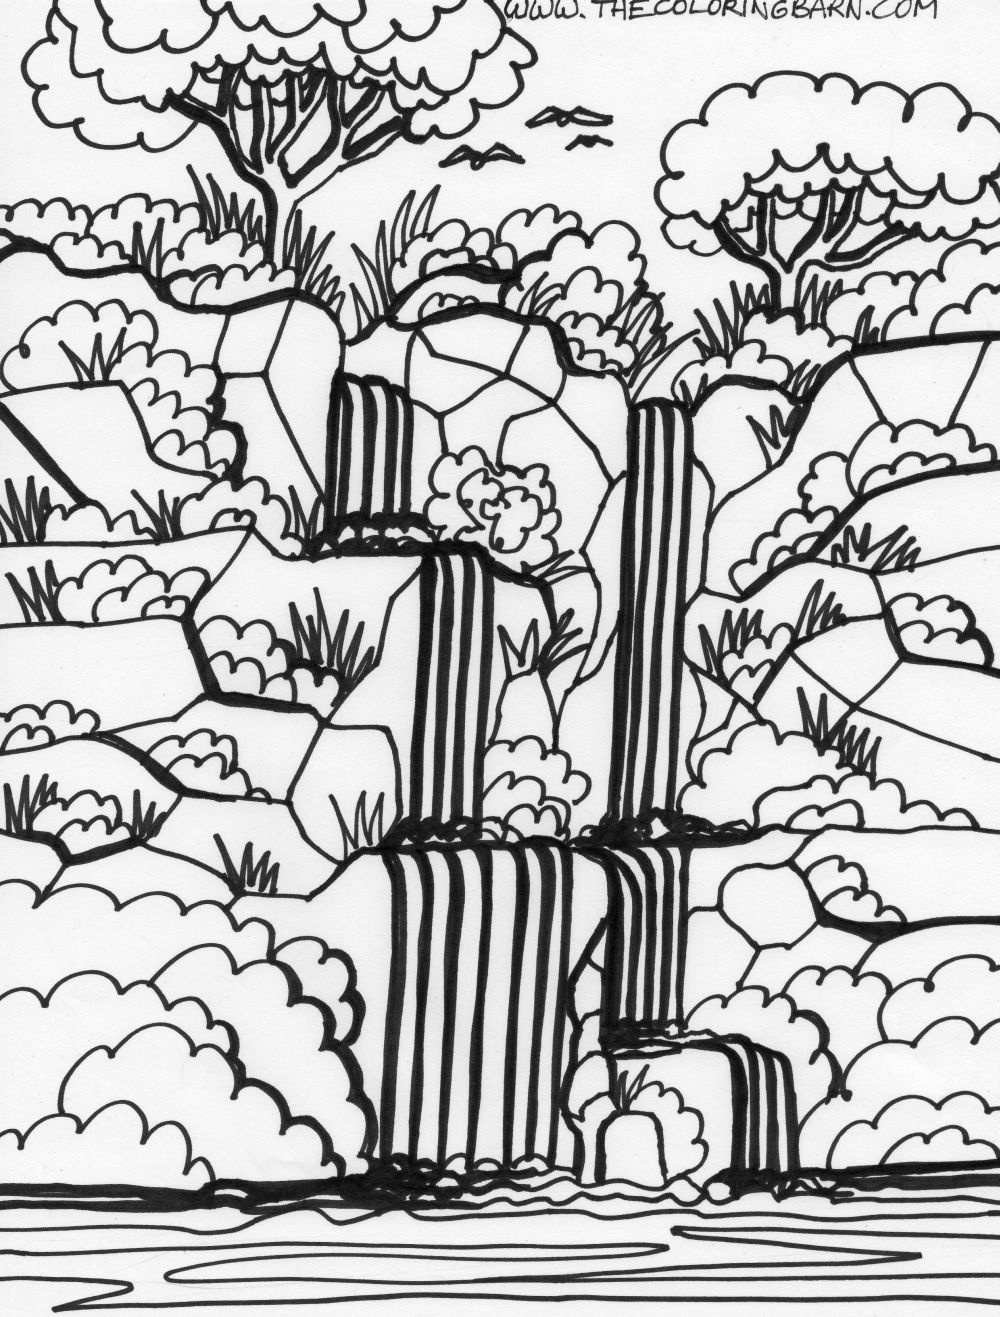 Amazon Rainforest Coloring Pages For Kids | Brazil Inspiration - Free Printable Waterfall Coloring Pages